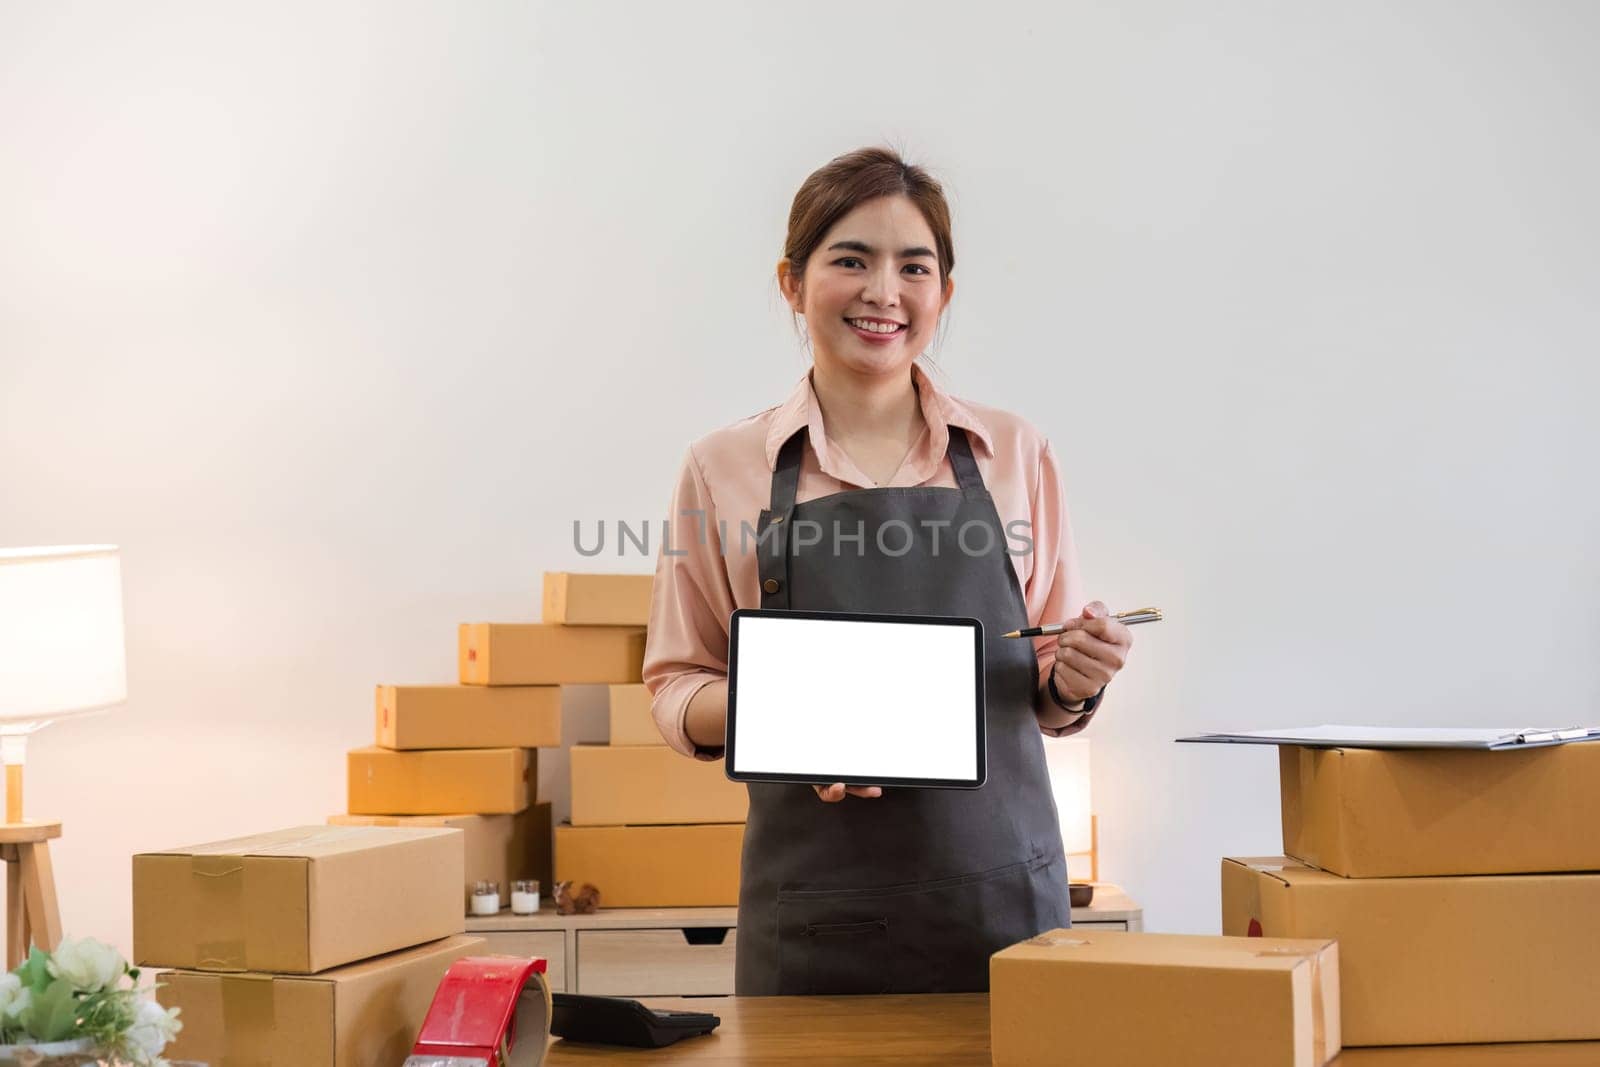 Happy Asian businesswoman holding laptop or tablet with blank screen standing in warehouse office with boxes of merchandise. Look at the camera and smile in a friendly way. by wichayada